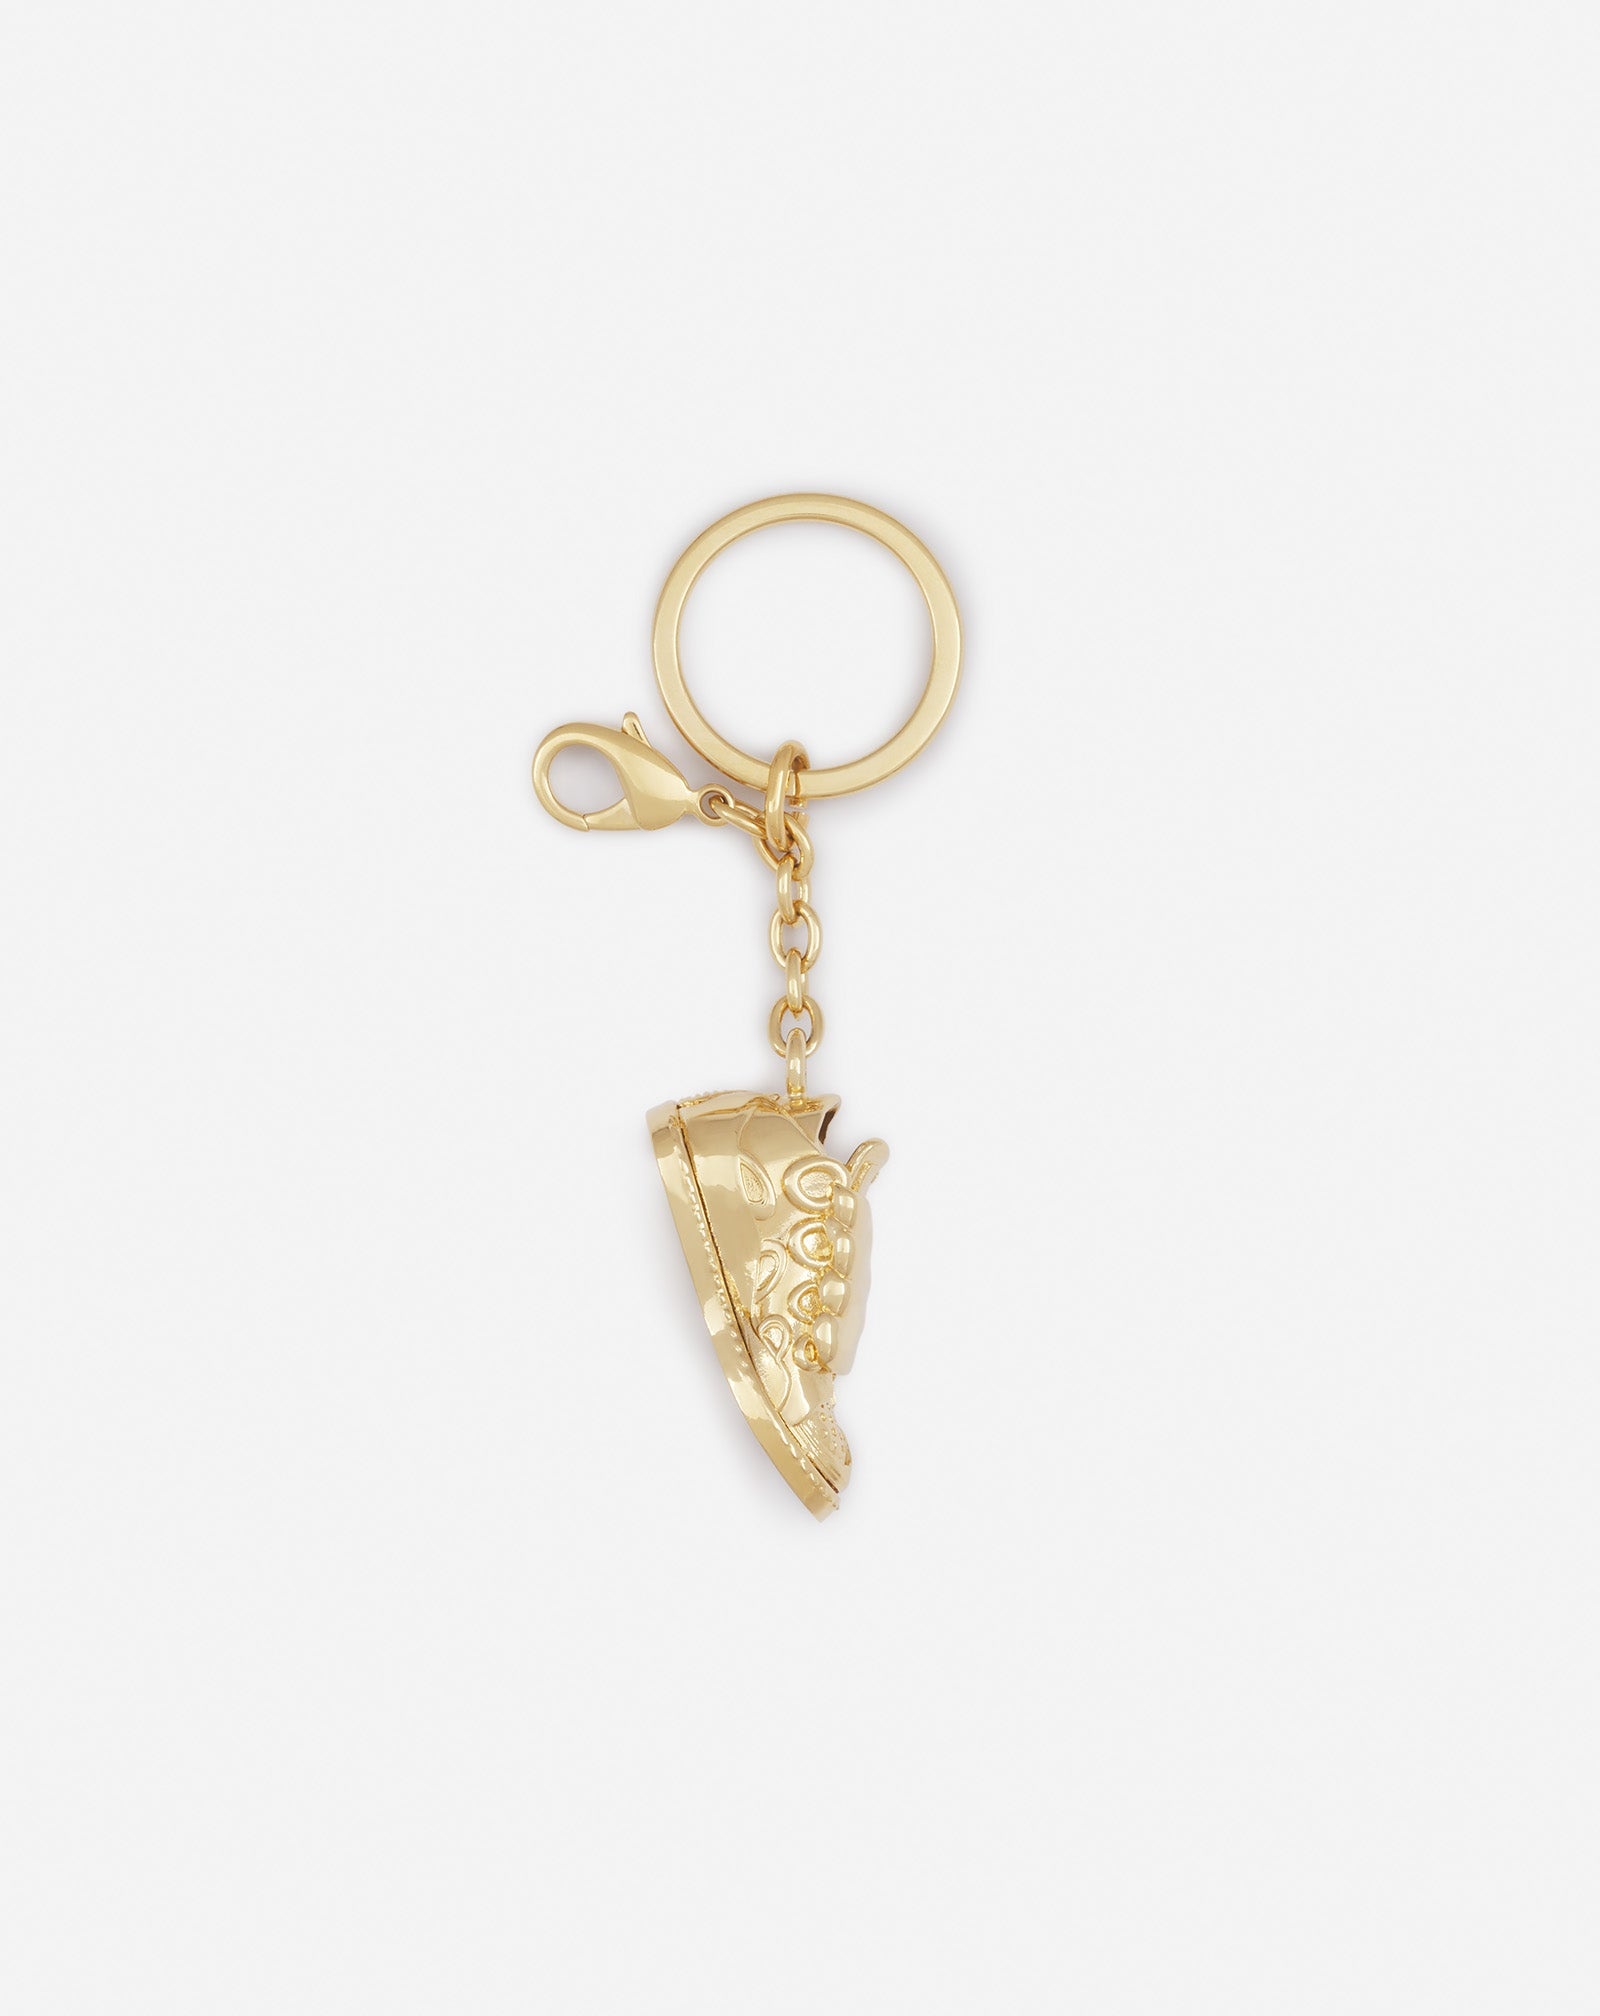 CURB SNEAKERS BRASS KEY RING - 1